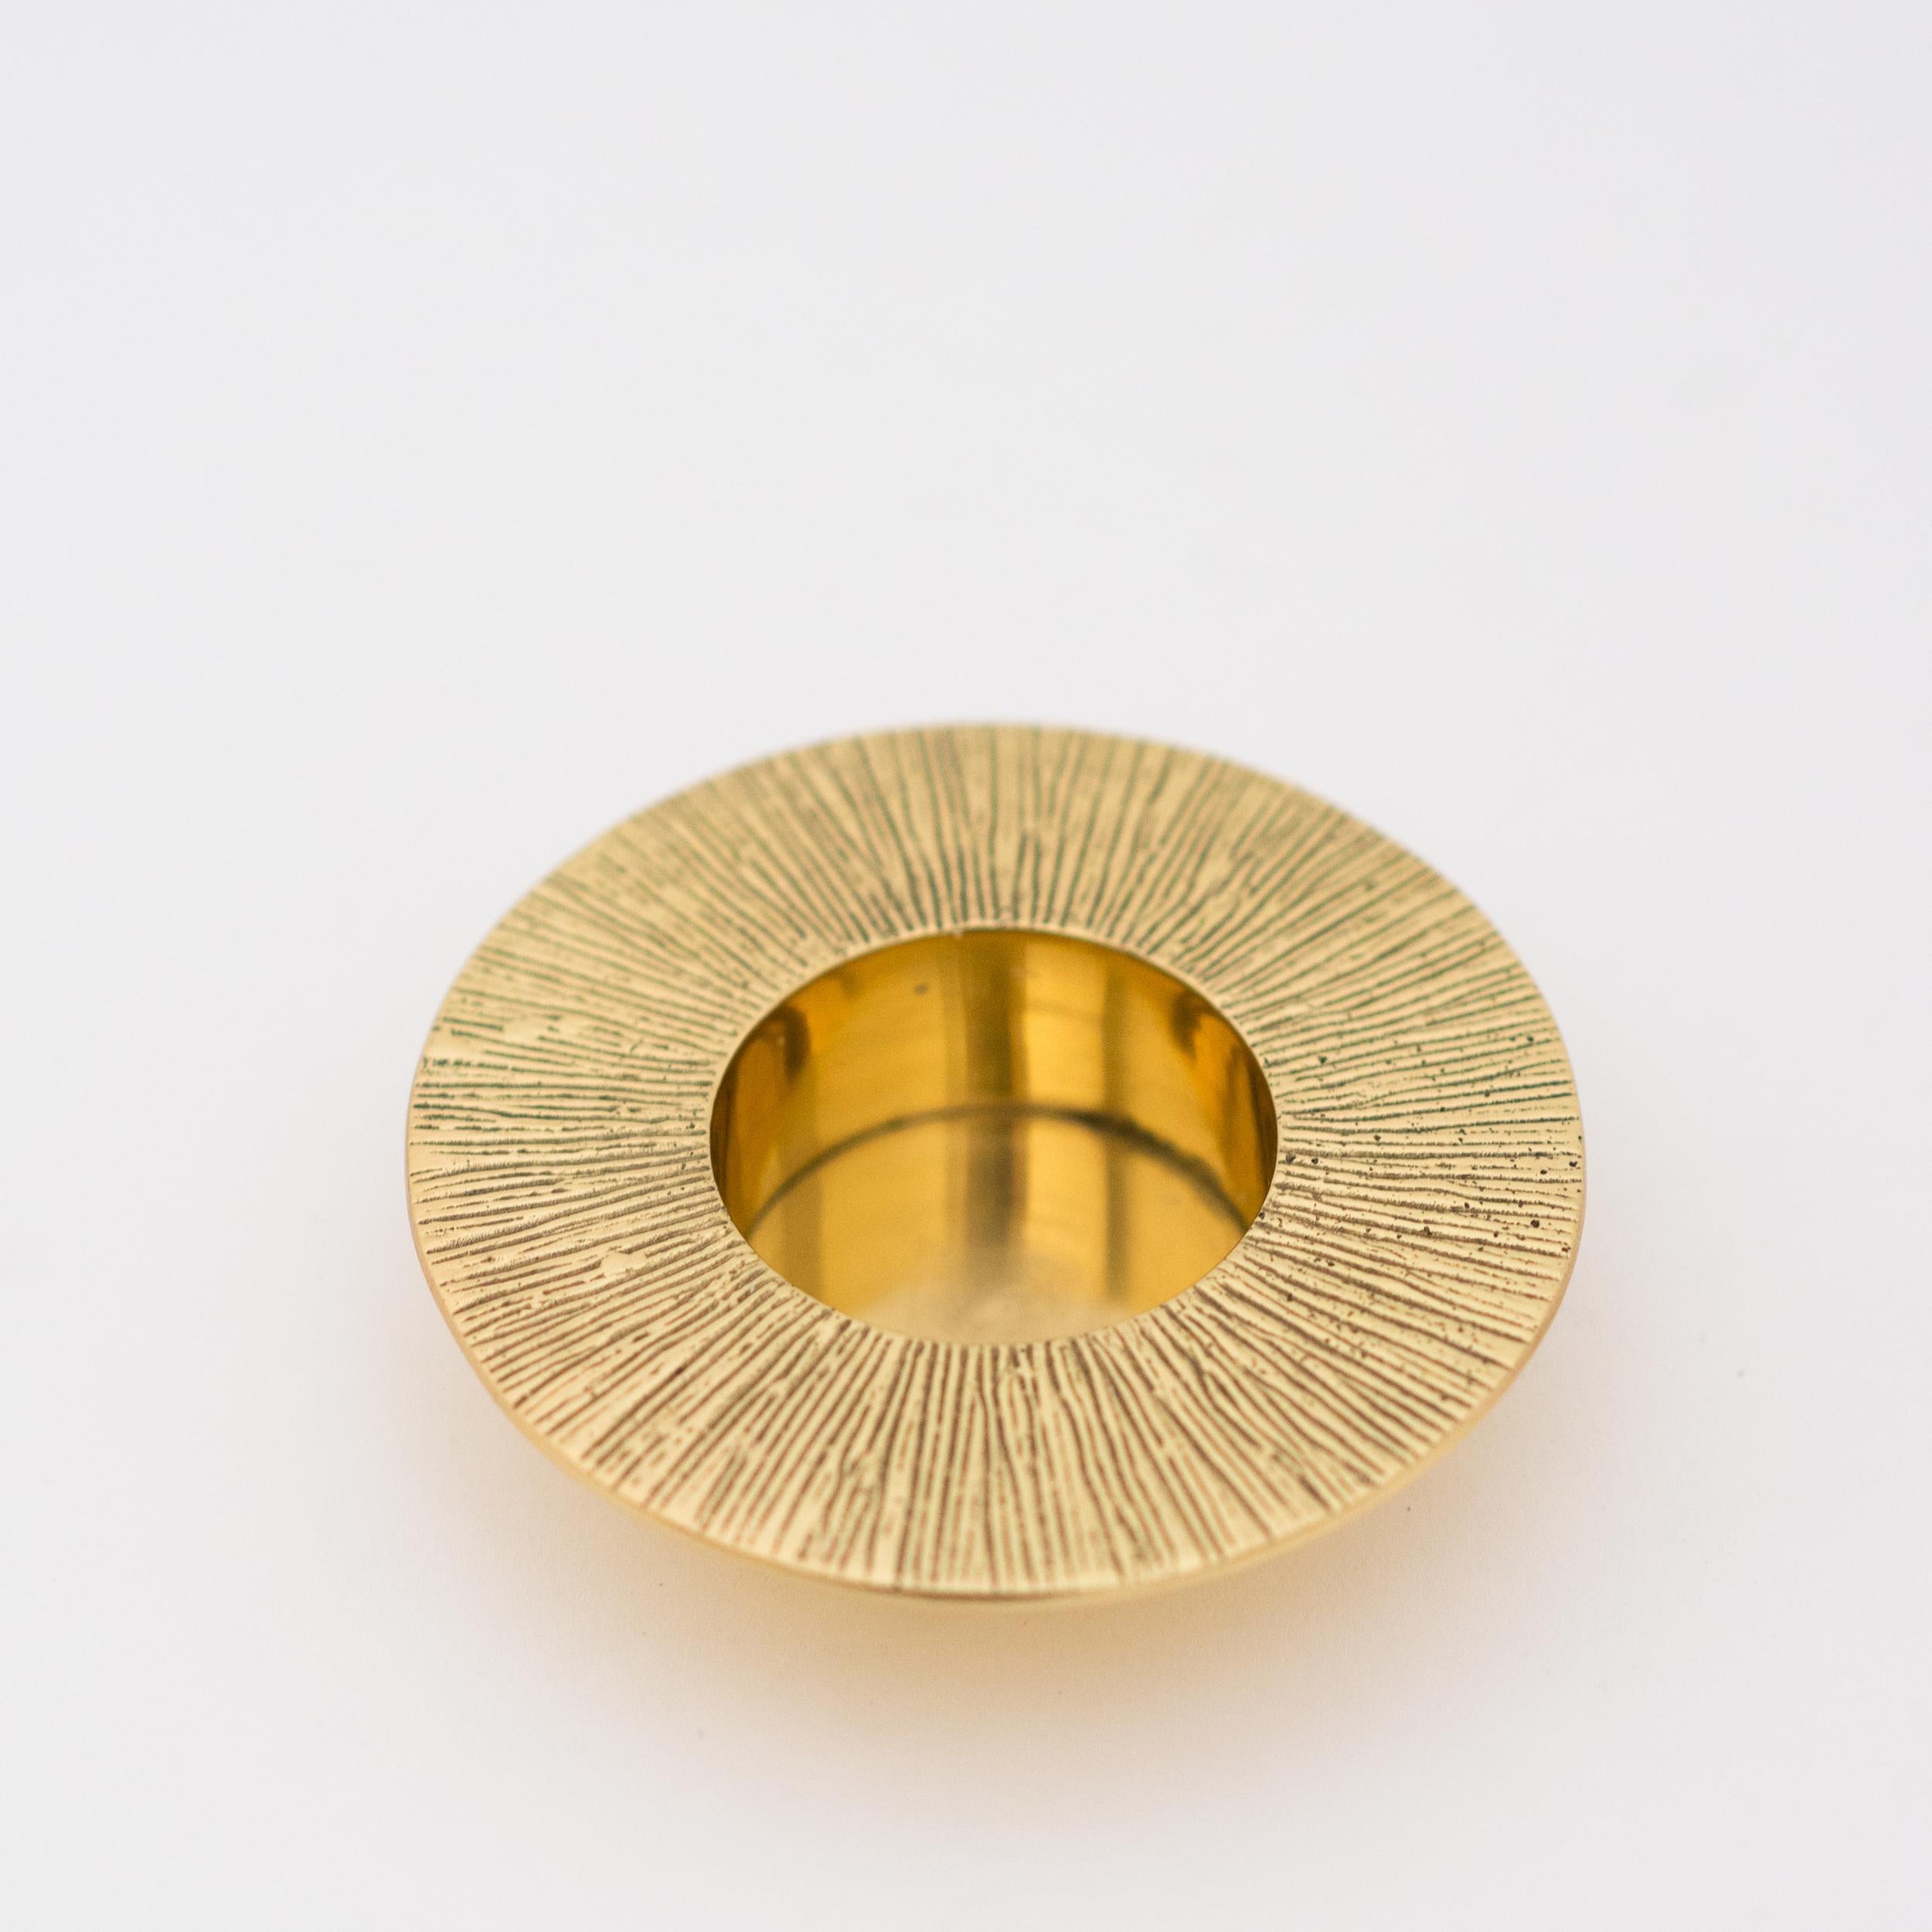 Each of those original brass tealight holders is handmade individually. Cast and textured using very traditional techniques, they are polished revealing the lustrous finish of this beautiful material.

Slight variations in the patina and polished